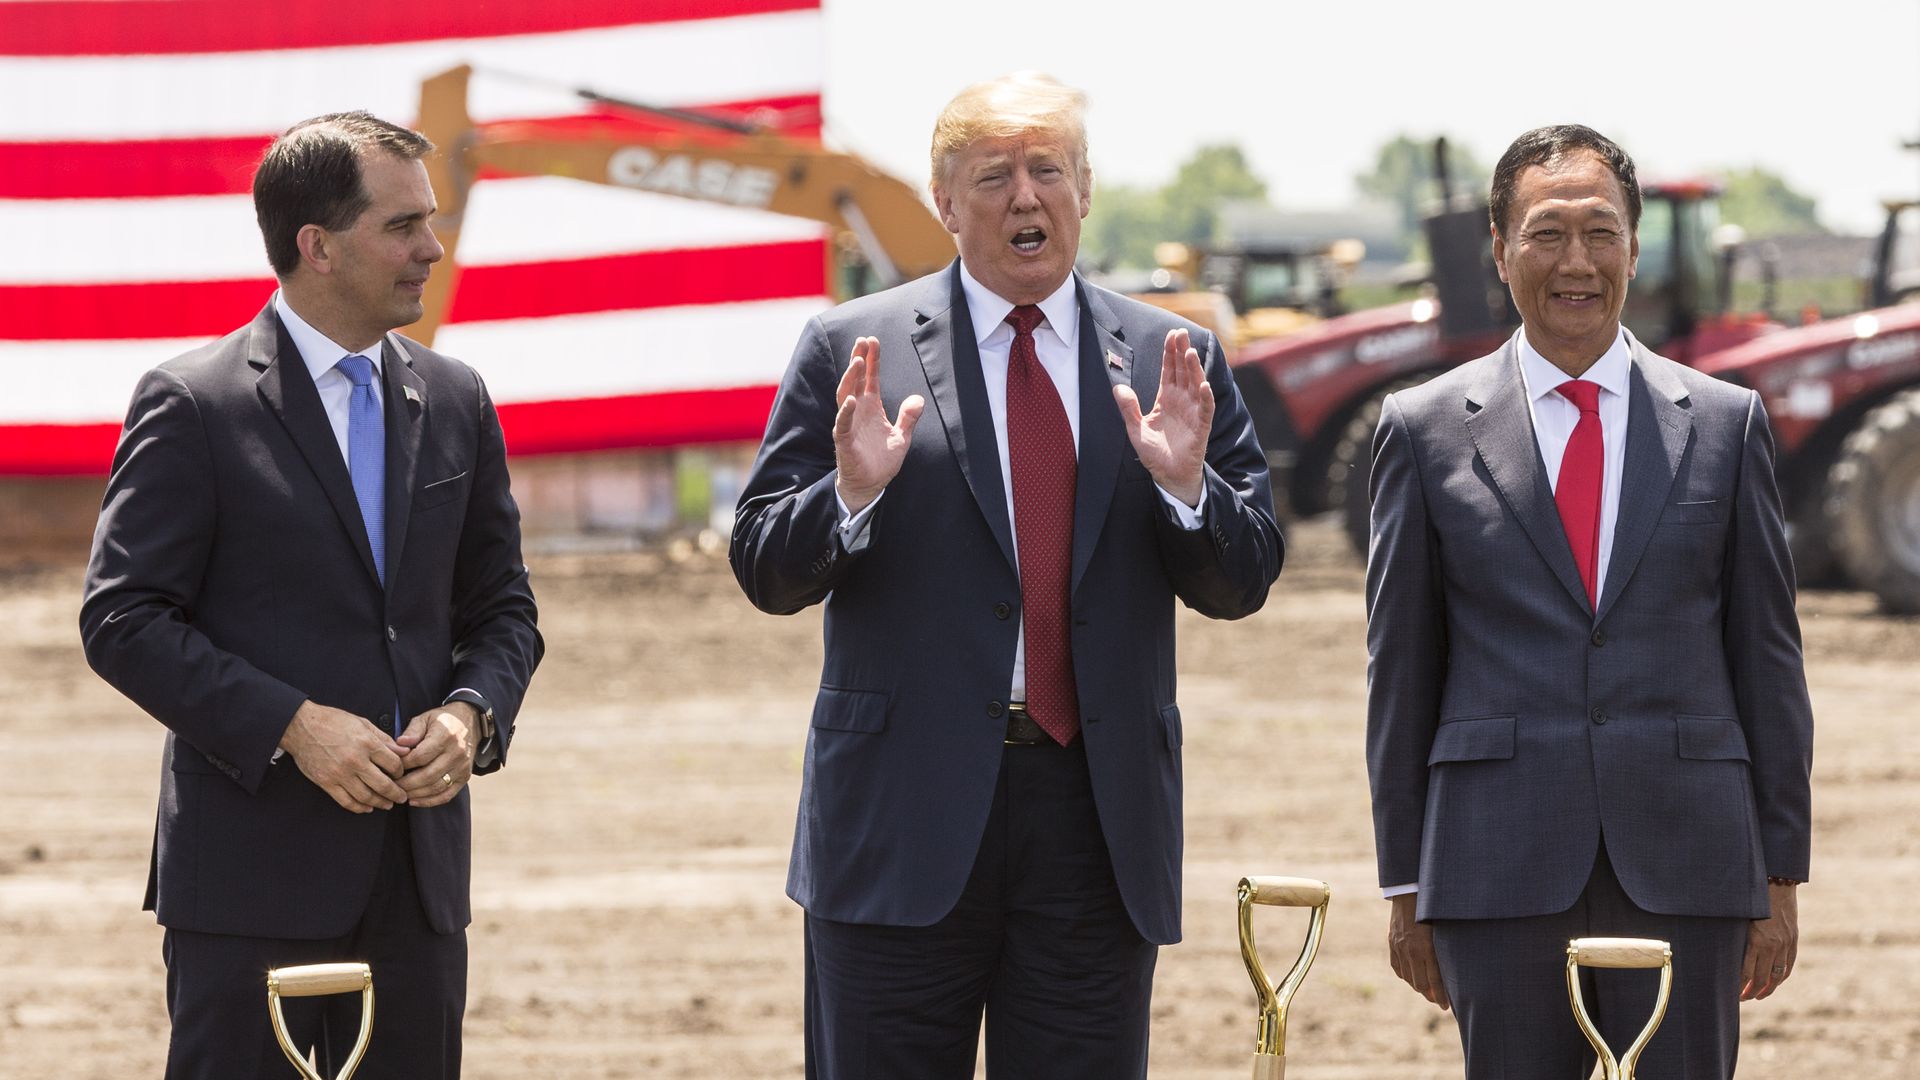 U.S. President Donald Trump, Wisconsin Gov. Scott Walker, Foxconn CEO Terry Gou at the groundbreaking for the Foxconn Technology Group plant in Mt Pleasant, Wisconsin